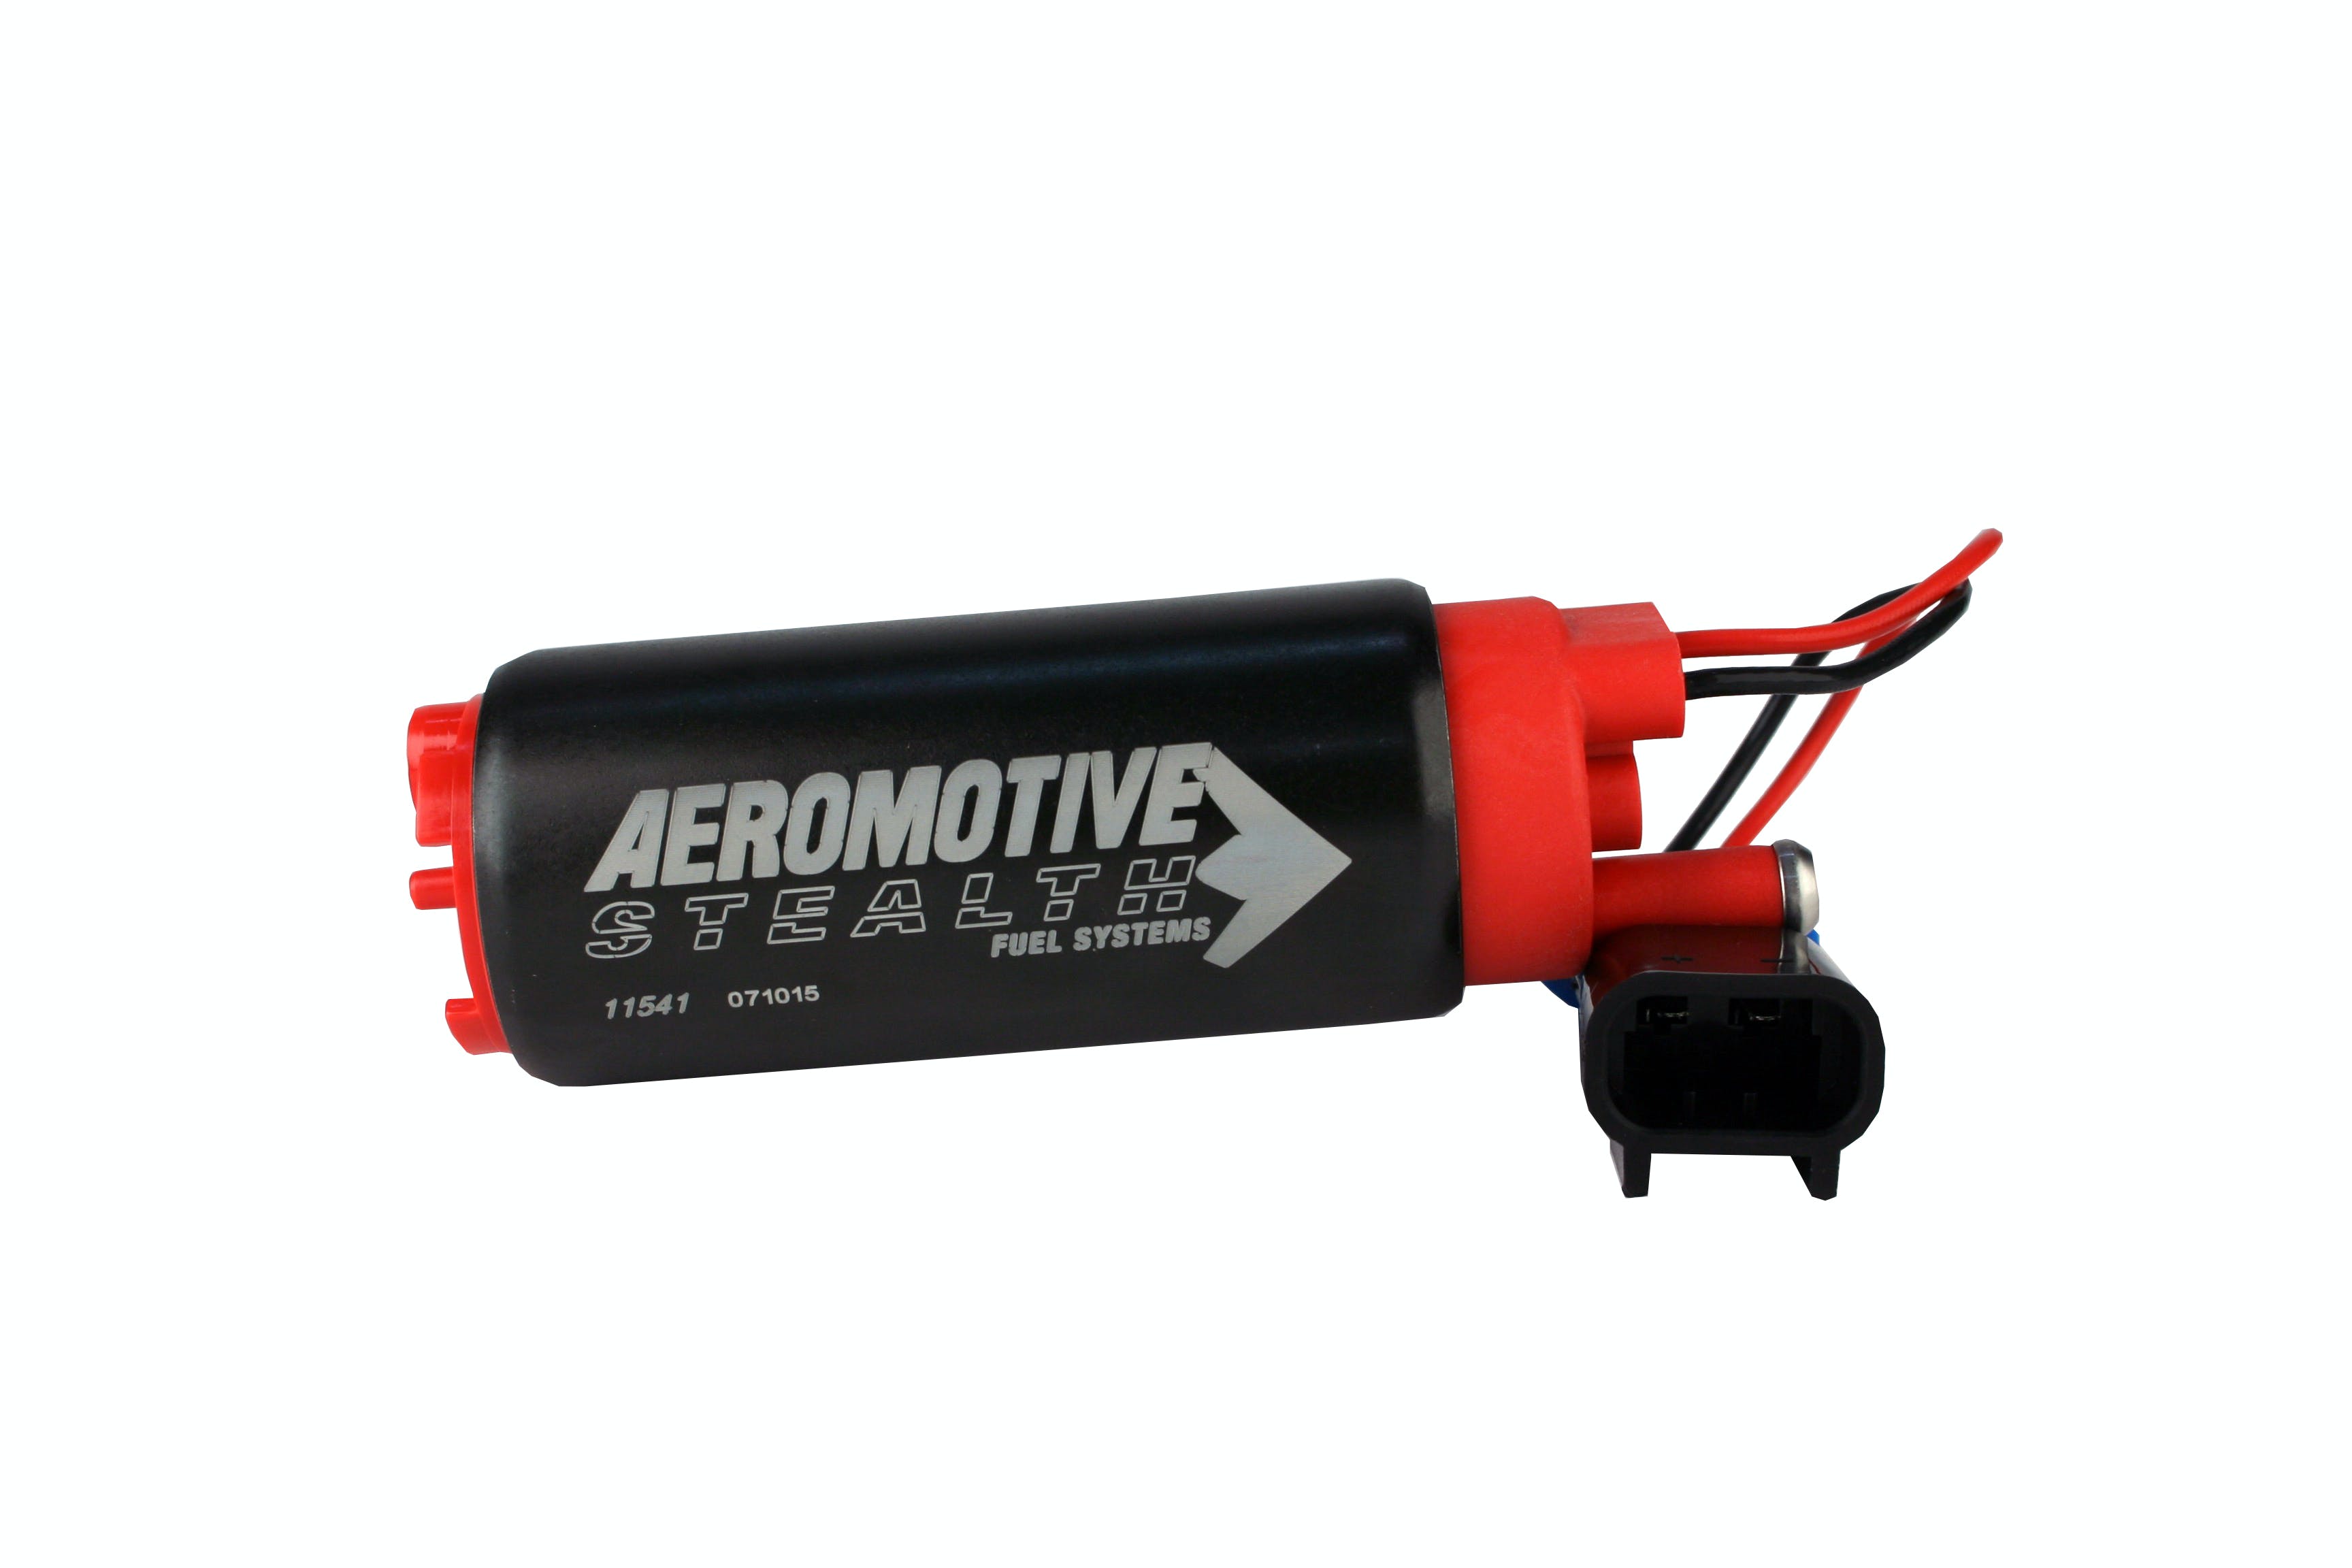 Aeromotive Fuel System 11541 340 Series Stealth In-Tank Fuel Pump, offset inlet